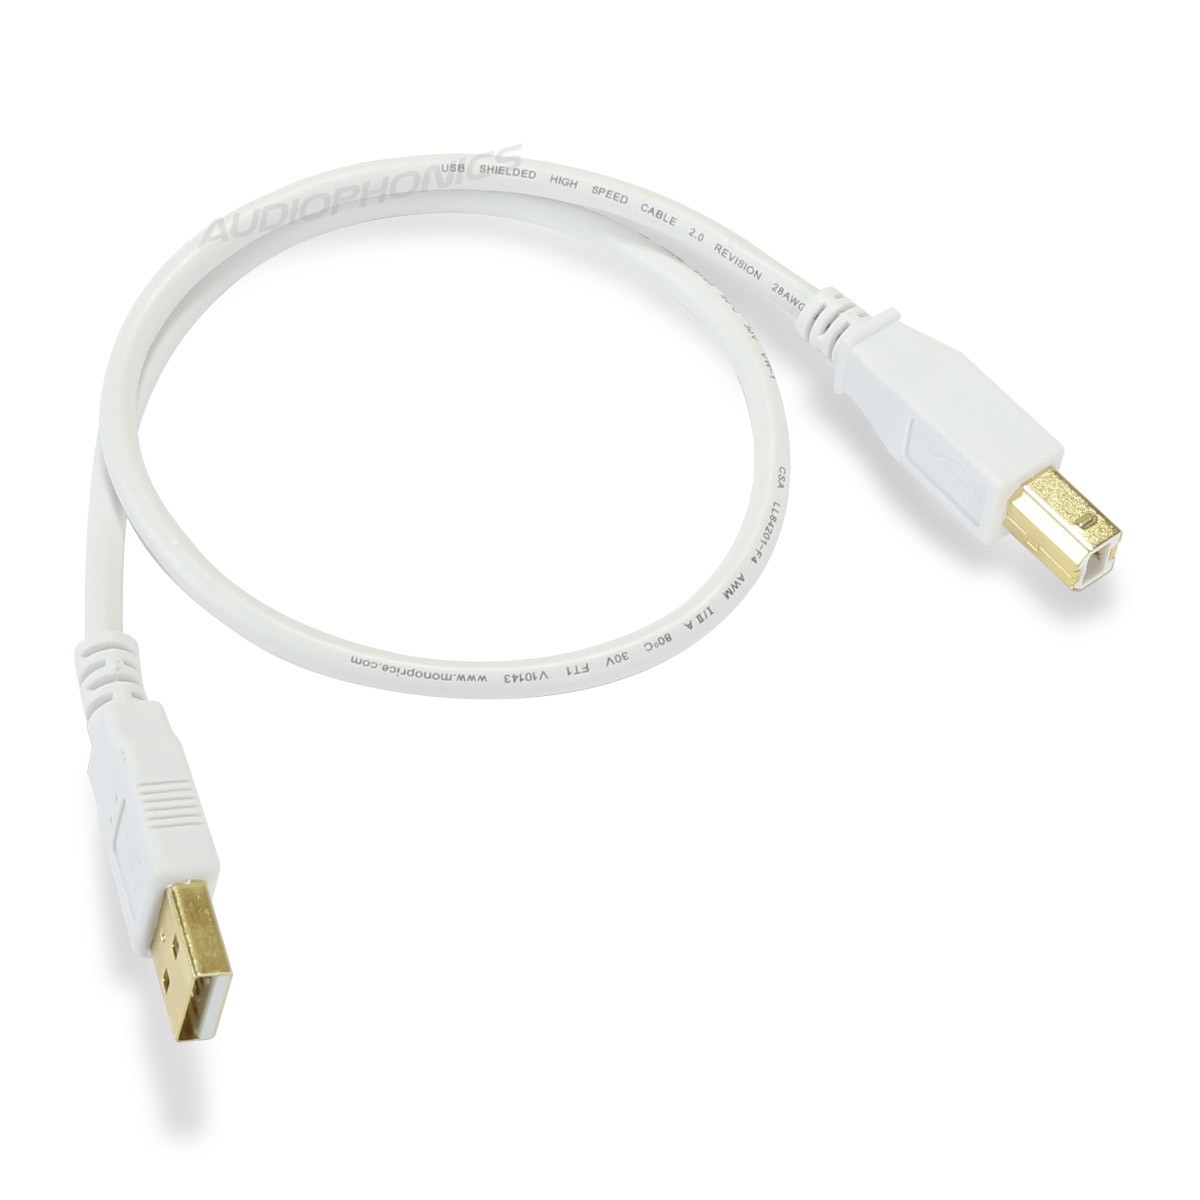 USB-A Male / USB-B Male 2.0 Cable Gold Plated Connectors 0.45m White